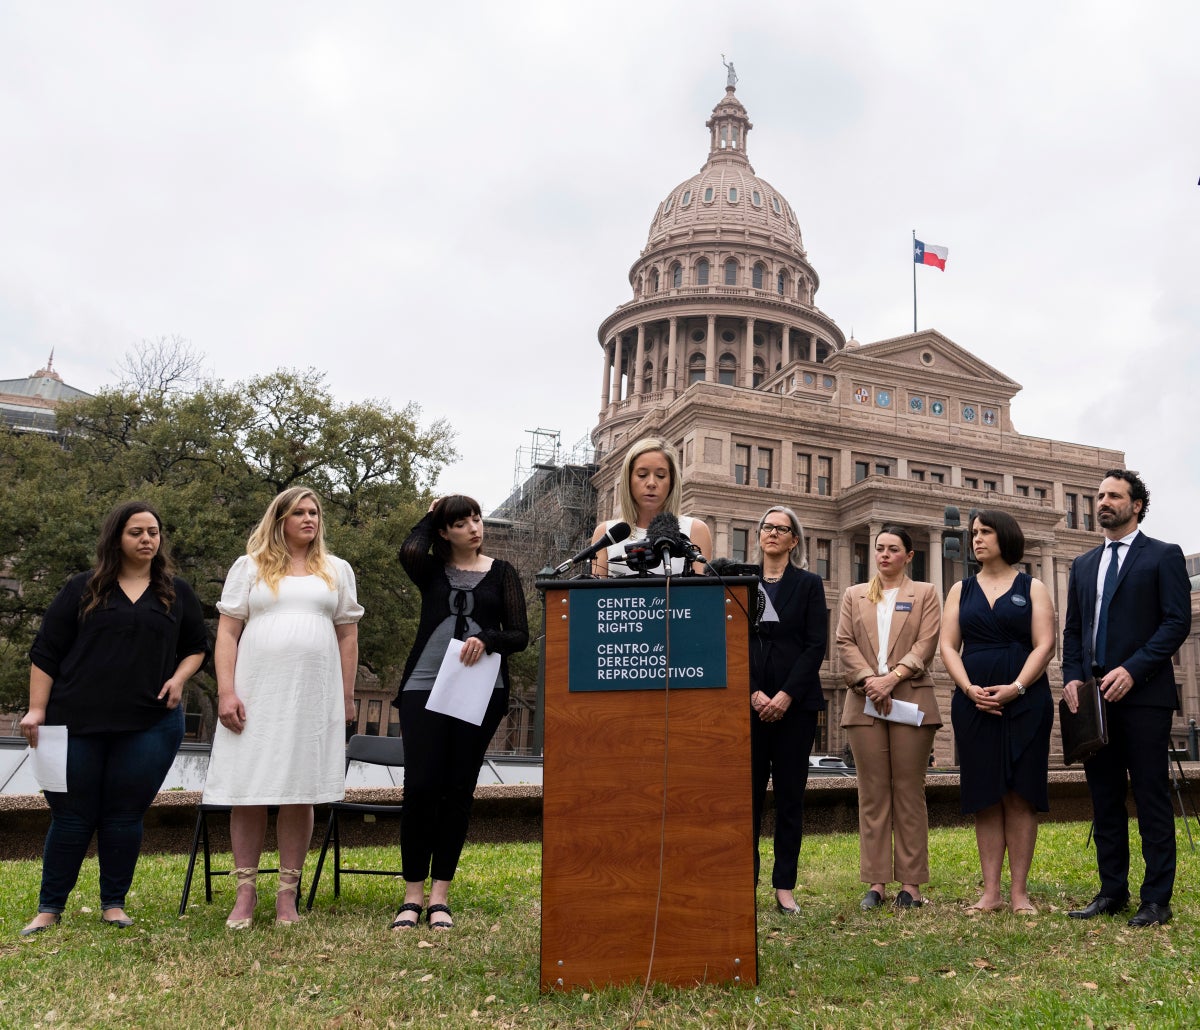 Texas women suing over anti-abortion law give historic and heartbreaking testimony in a landmark court case